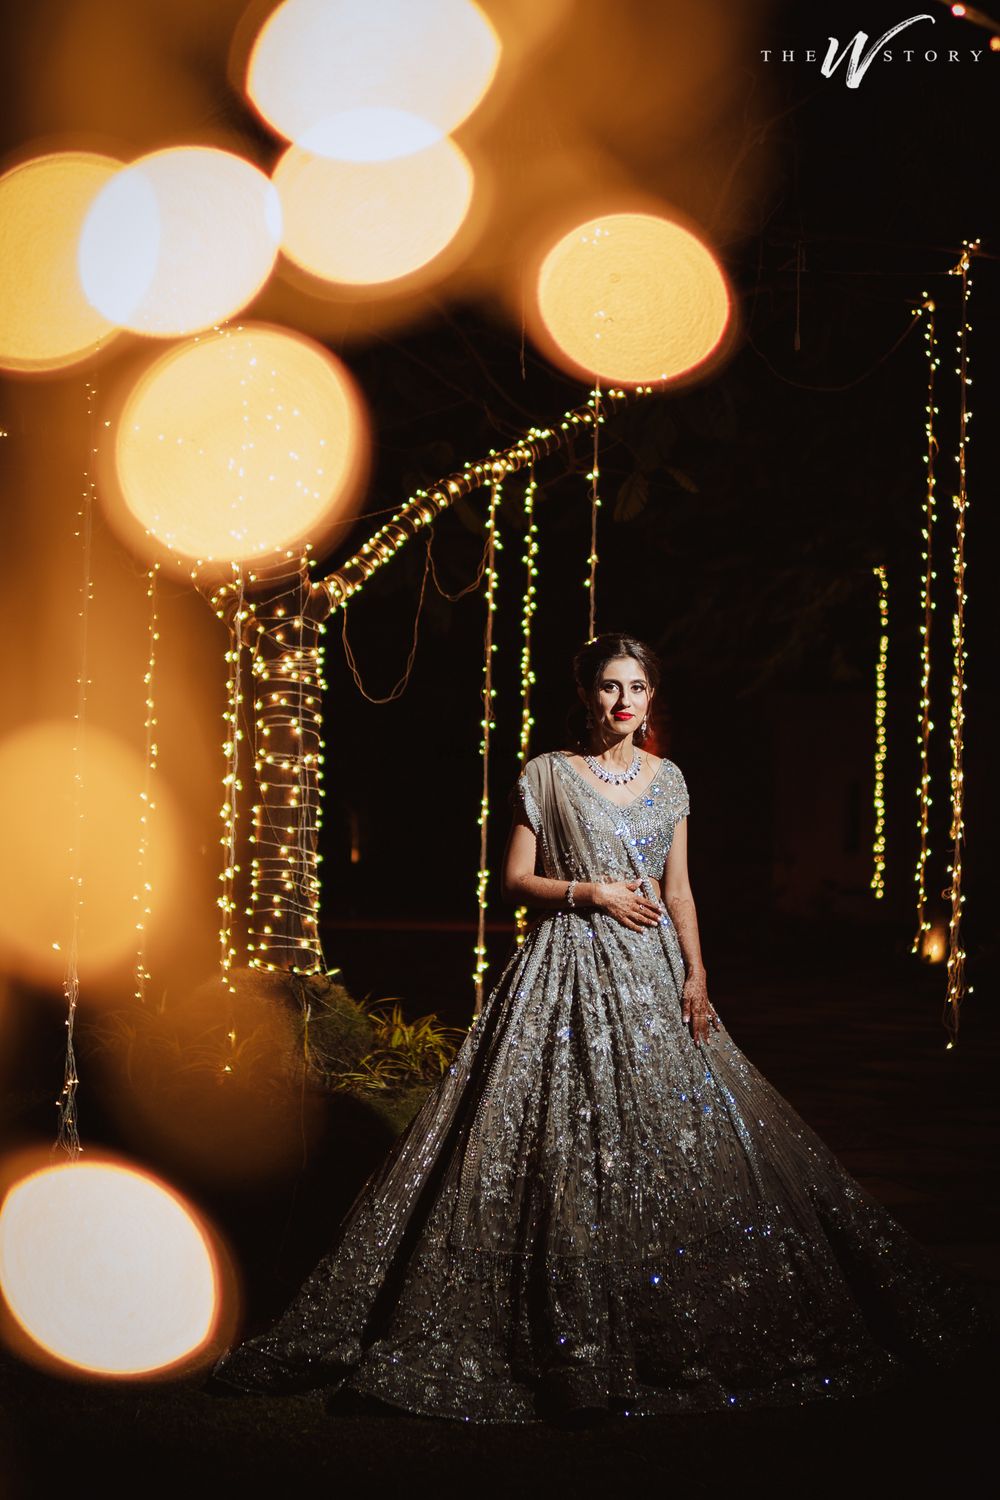 Photo of Bride dressed in a glimmering silver lehenga.